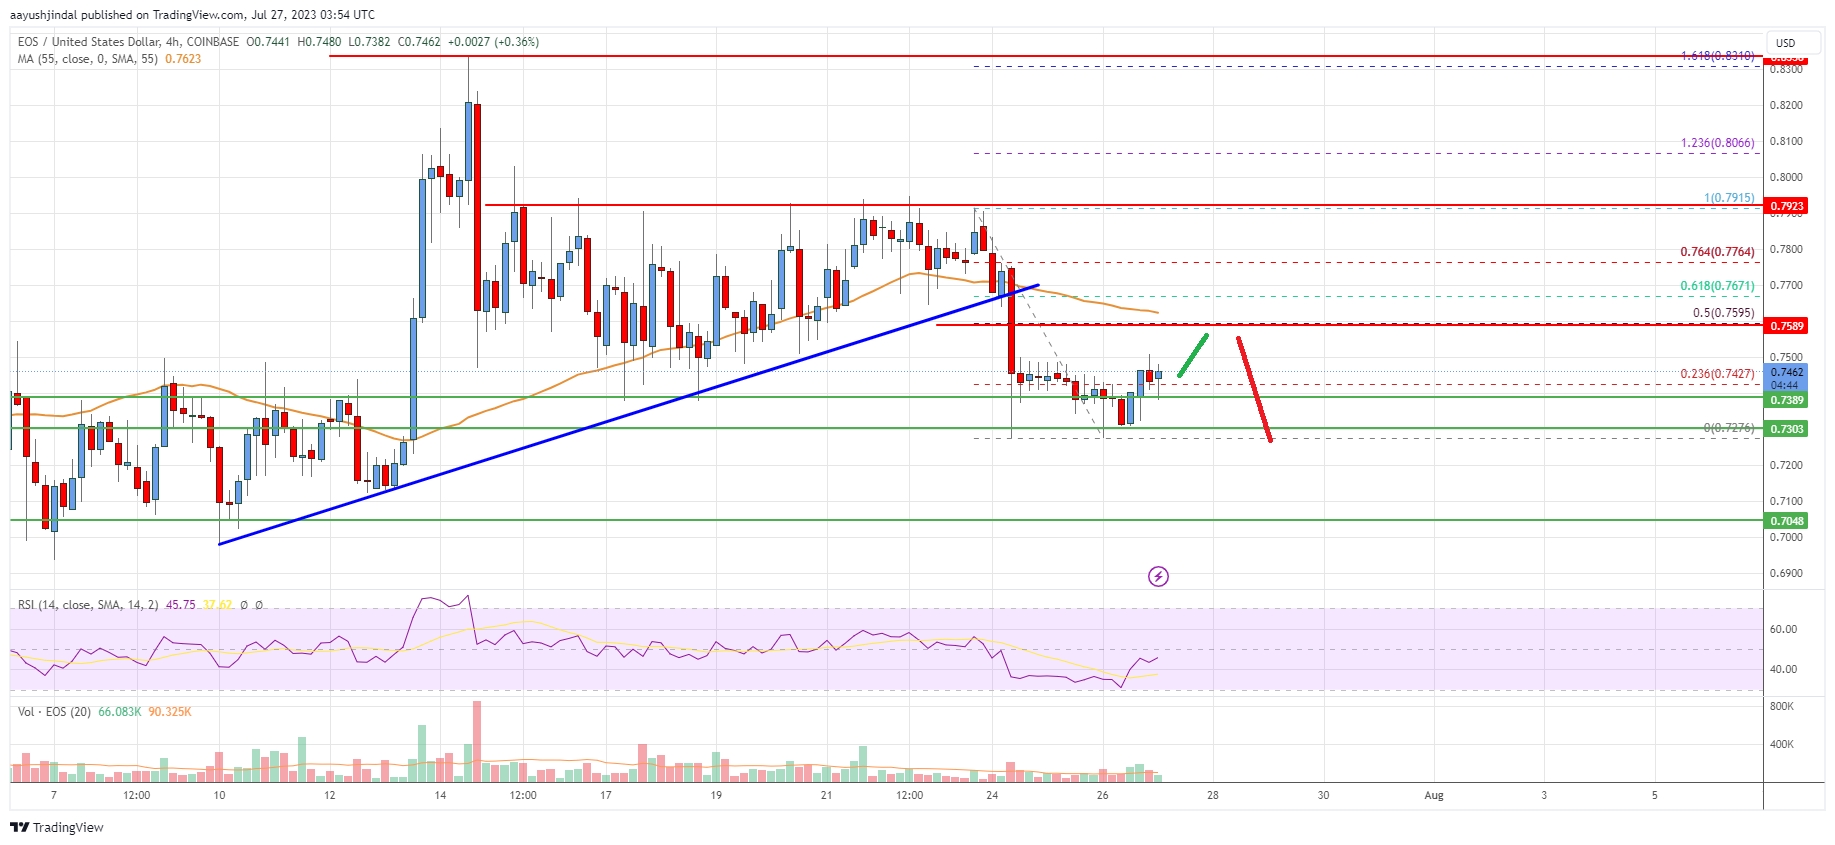 EOS Price Analysis: Risk of More Losses Below $0.73